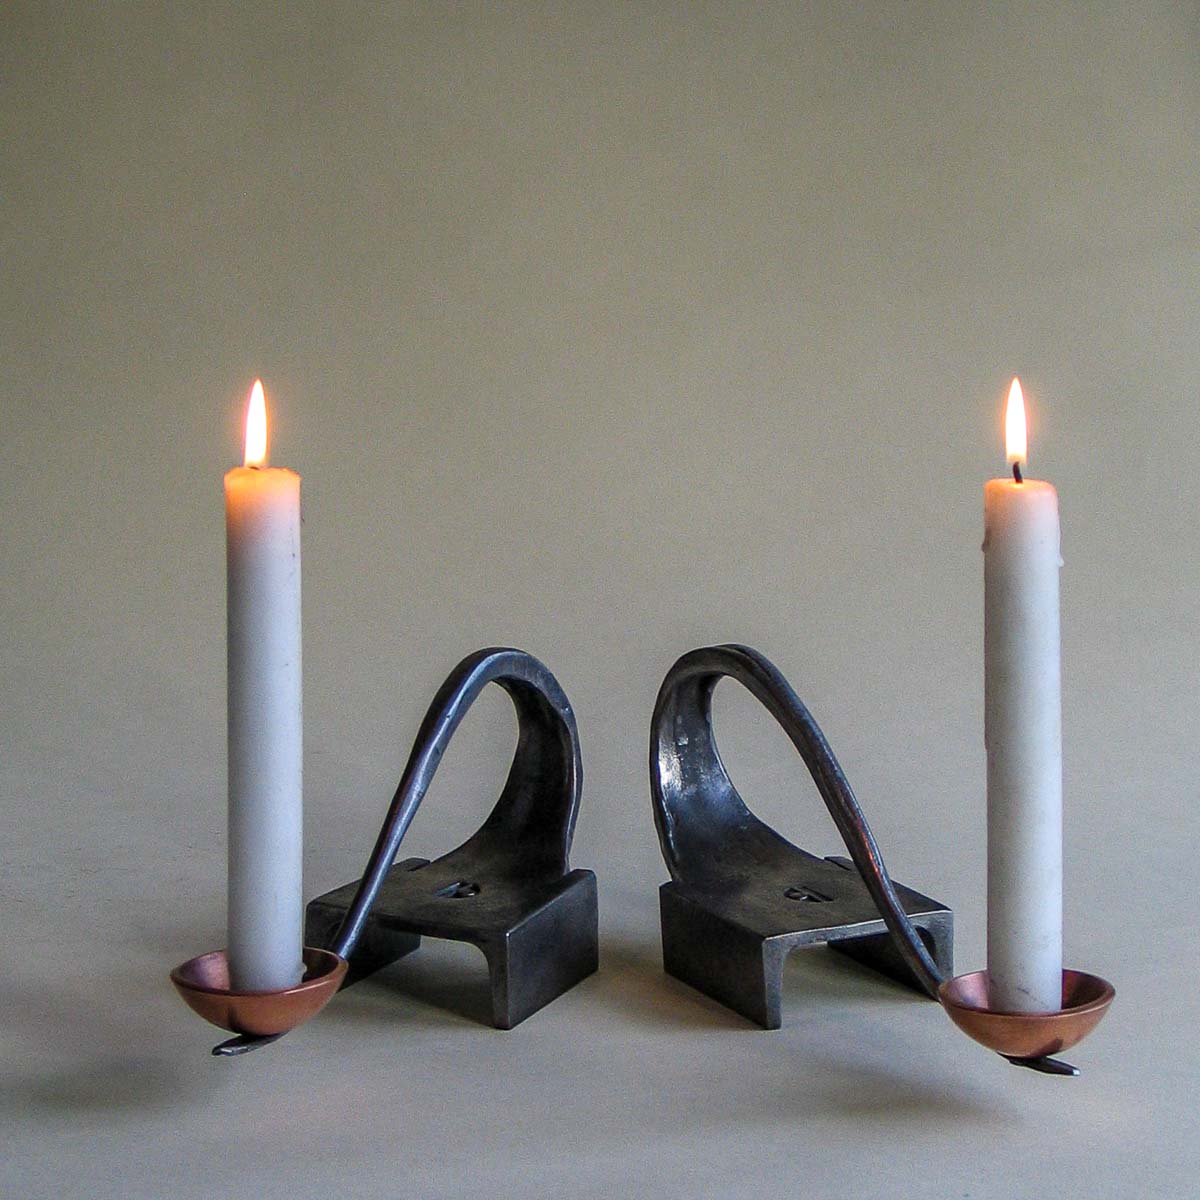 Forged Structural Steel Candlesticks